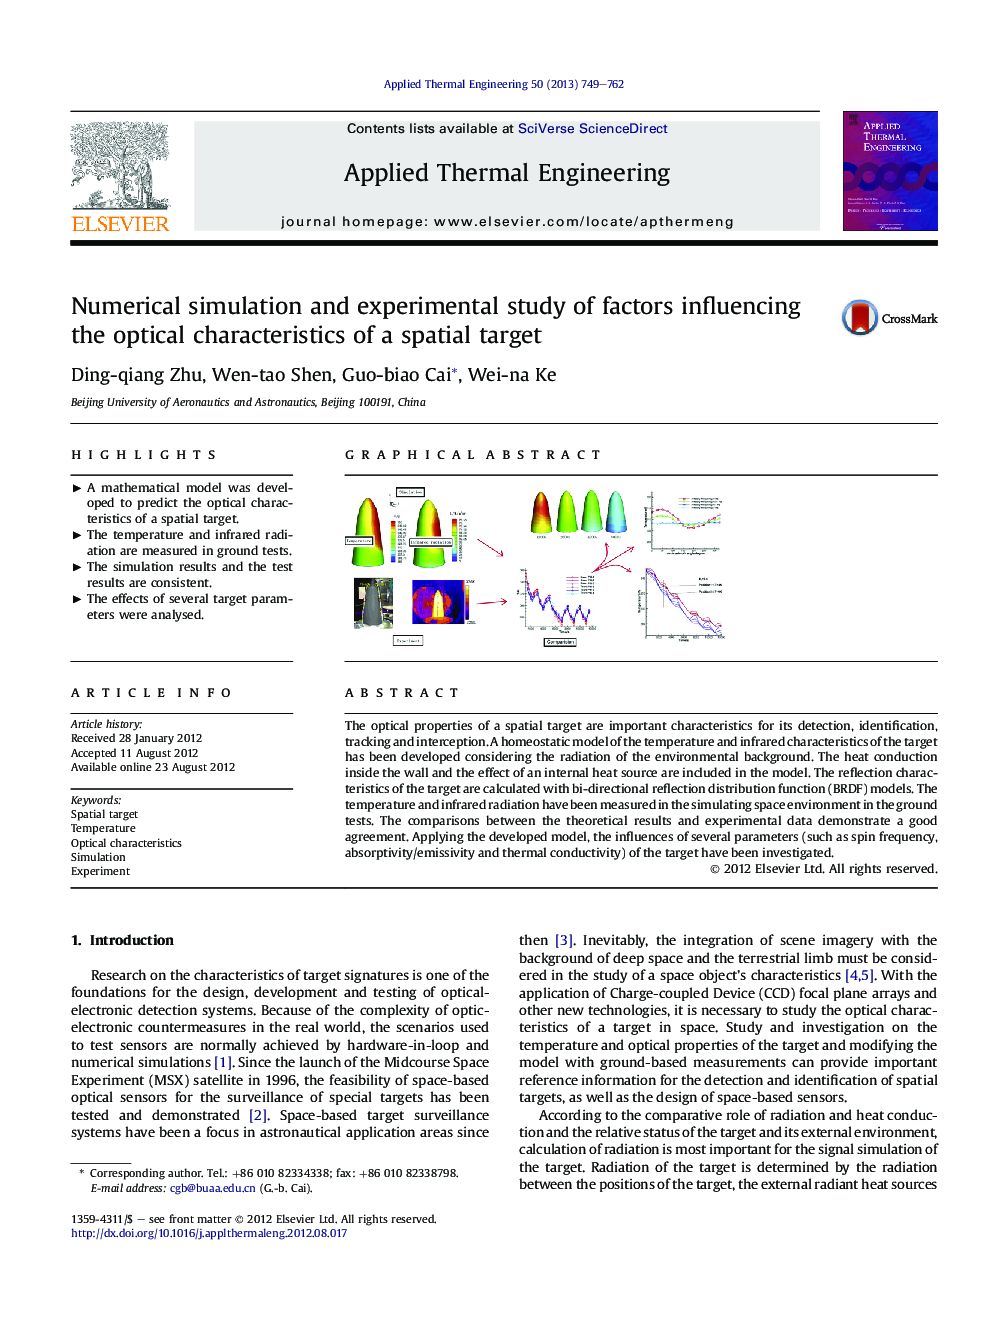 Numerical simulation and experimental study of factors influencing the optical characteristics of a spatial target